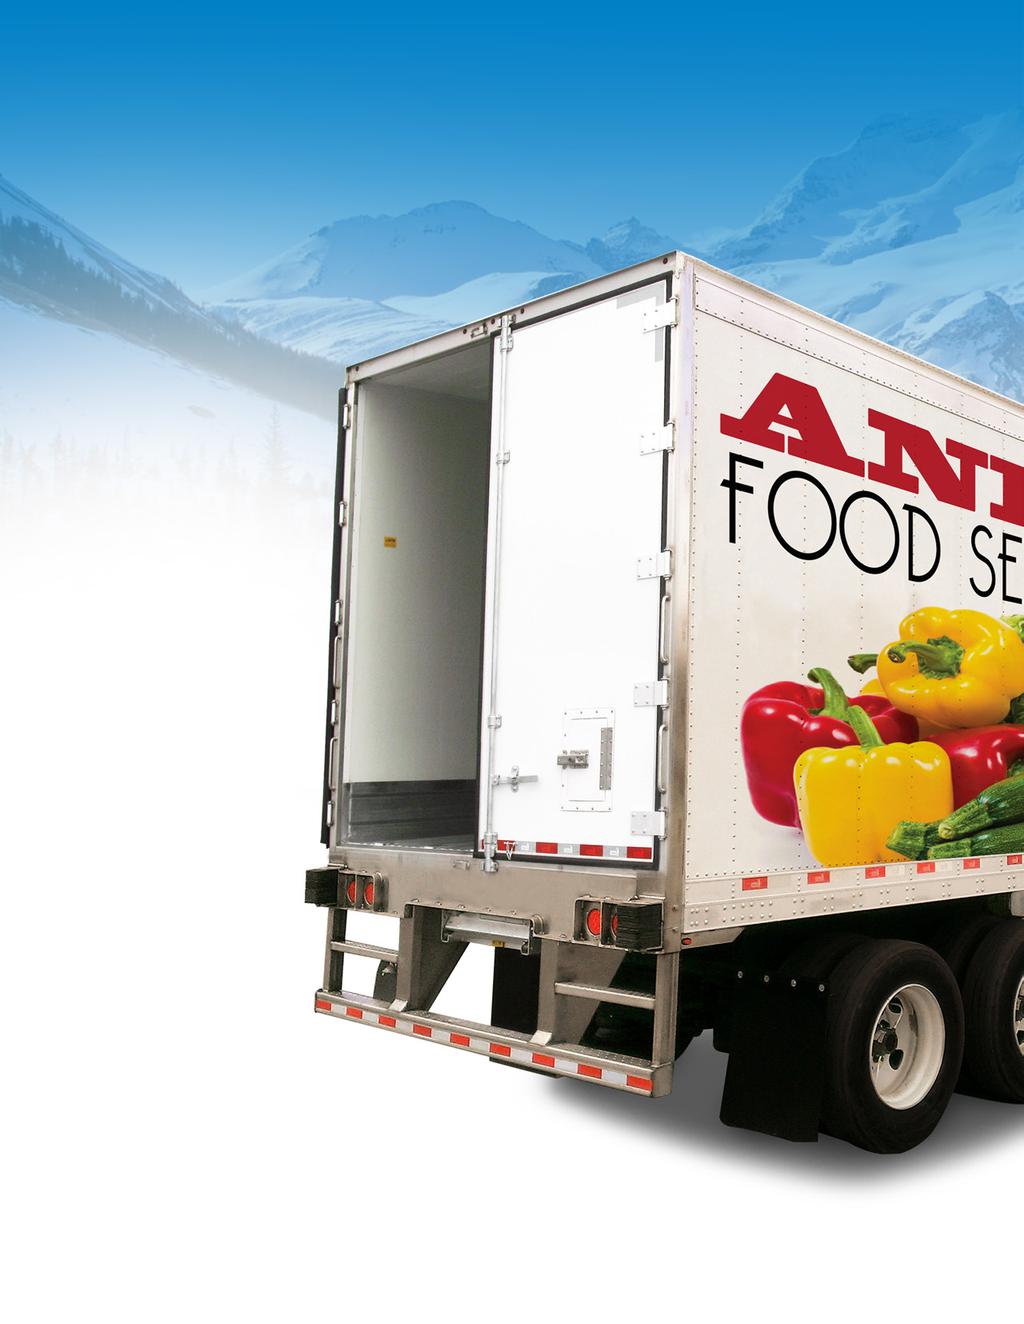 DETAILS THAT MAKE A REAL DIFFERENCE IN MULTI-TEMP/MULTI-STOP DISTRIBUTION Emperor G2 refrigerated distribution trailers are uniquely designed with extra features to protect perishable products, while